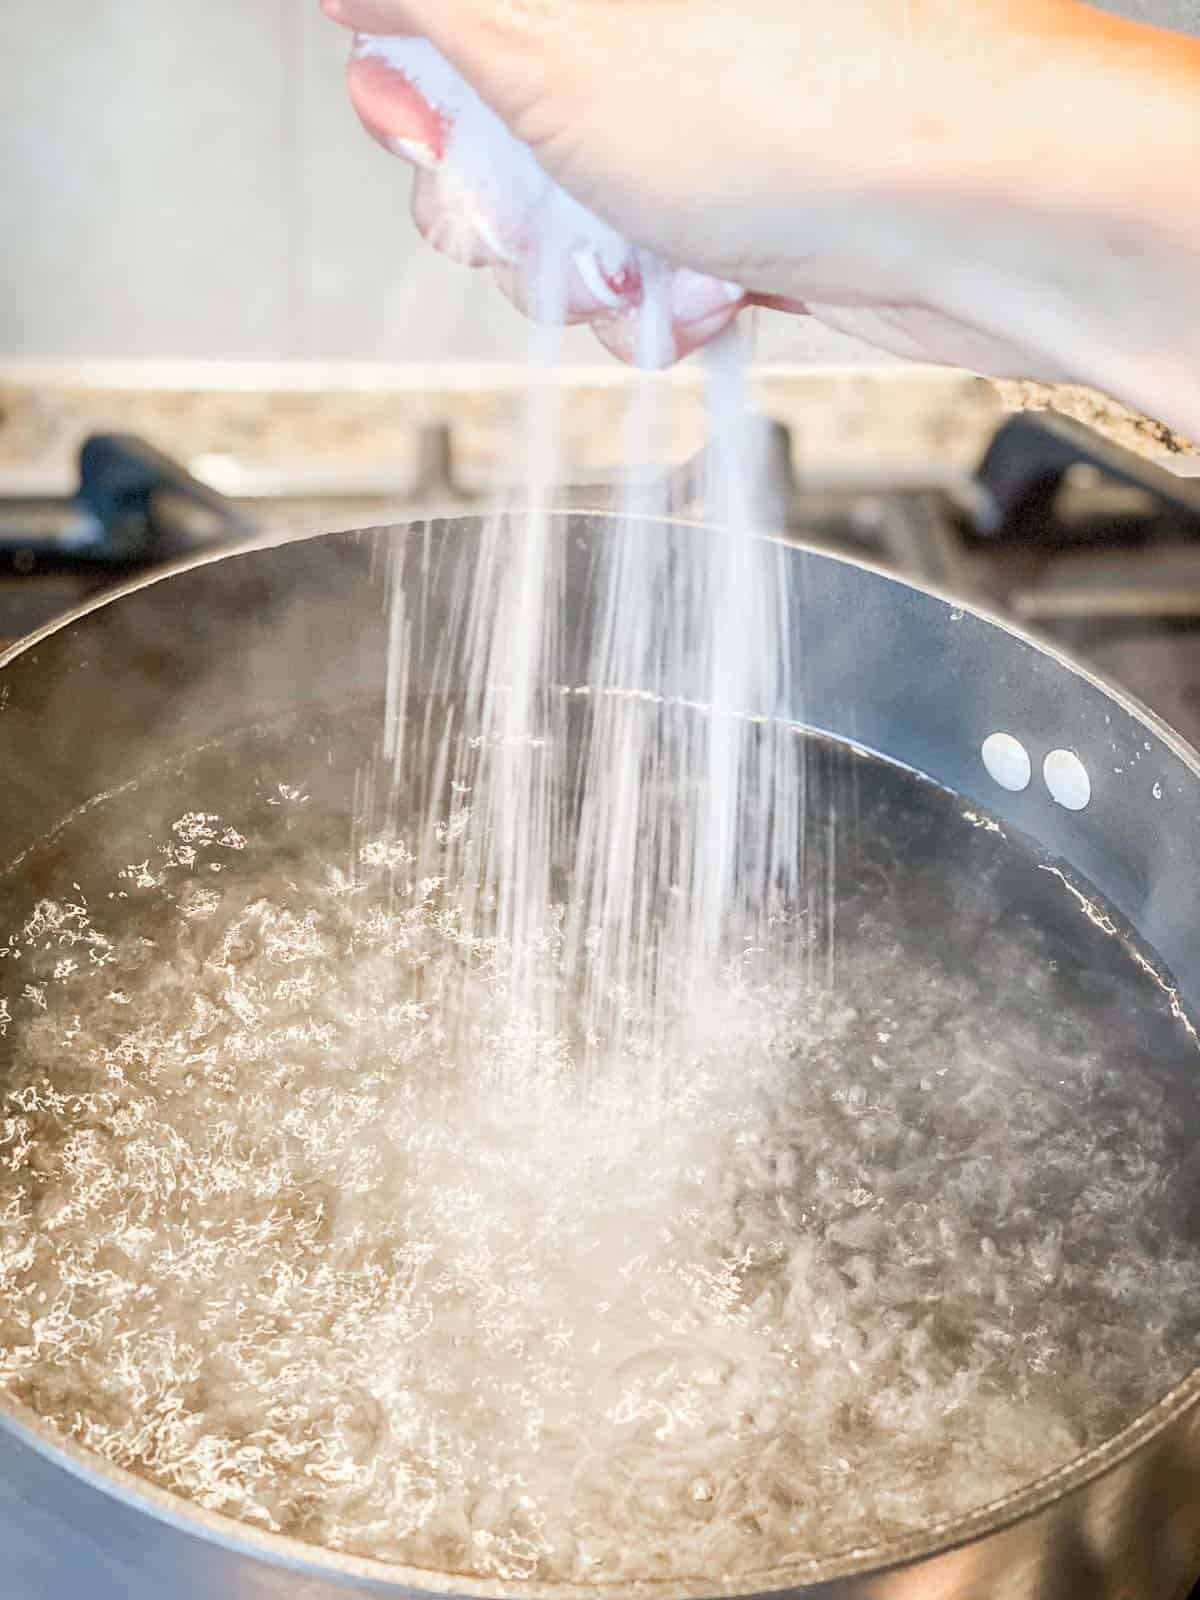 A handful of salt being released into a pot of boiling water.